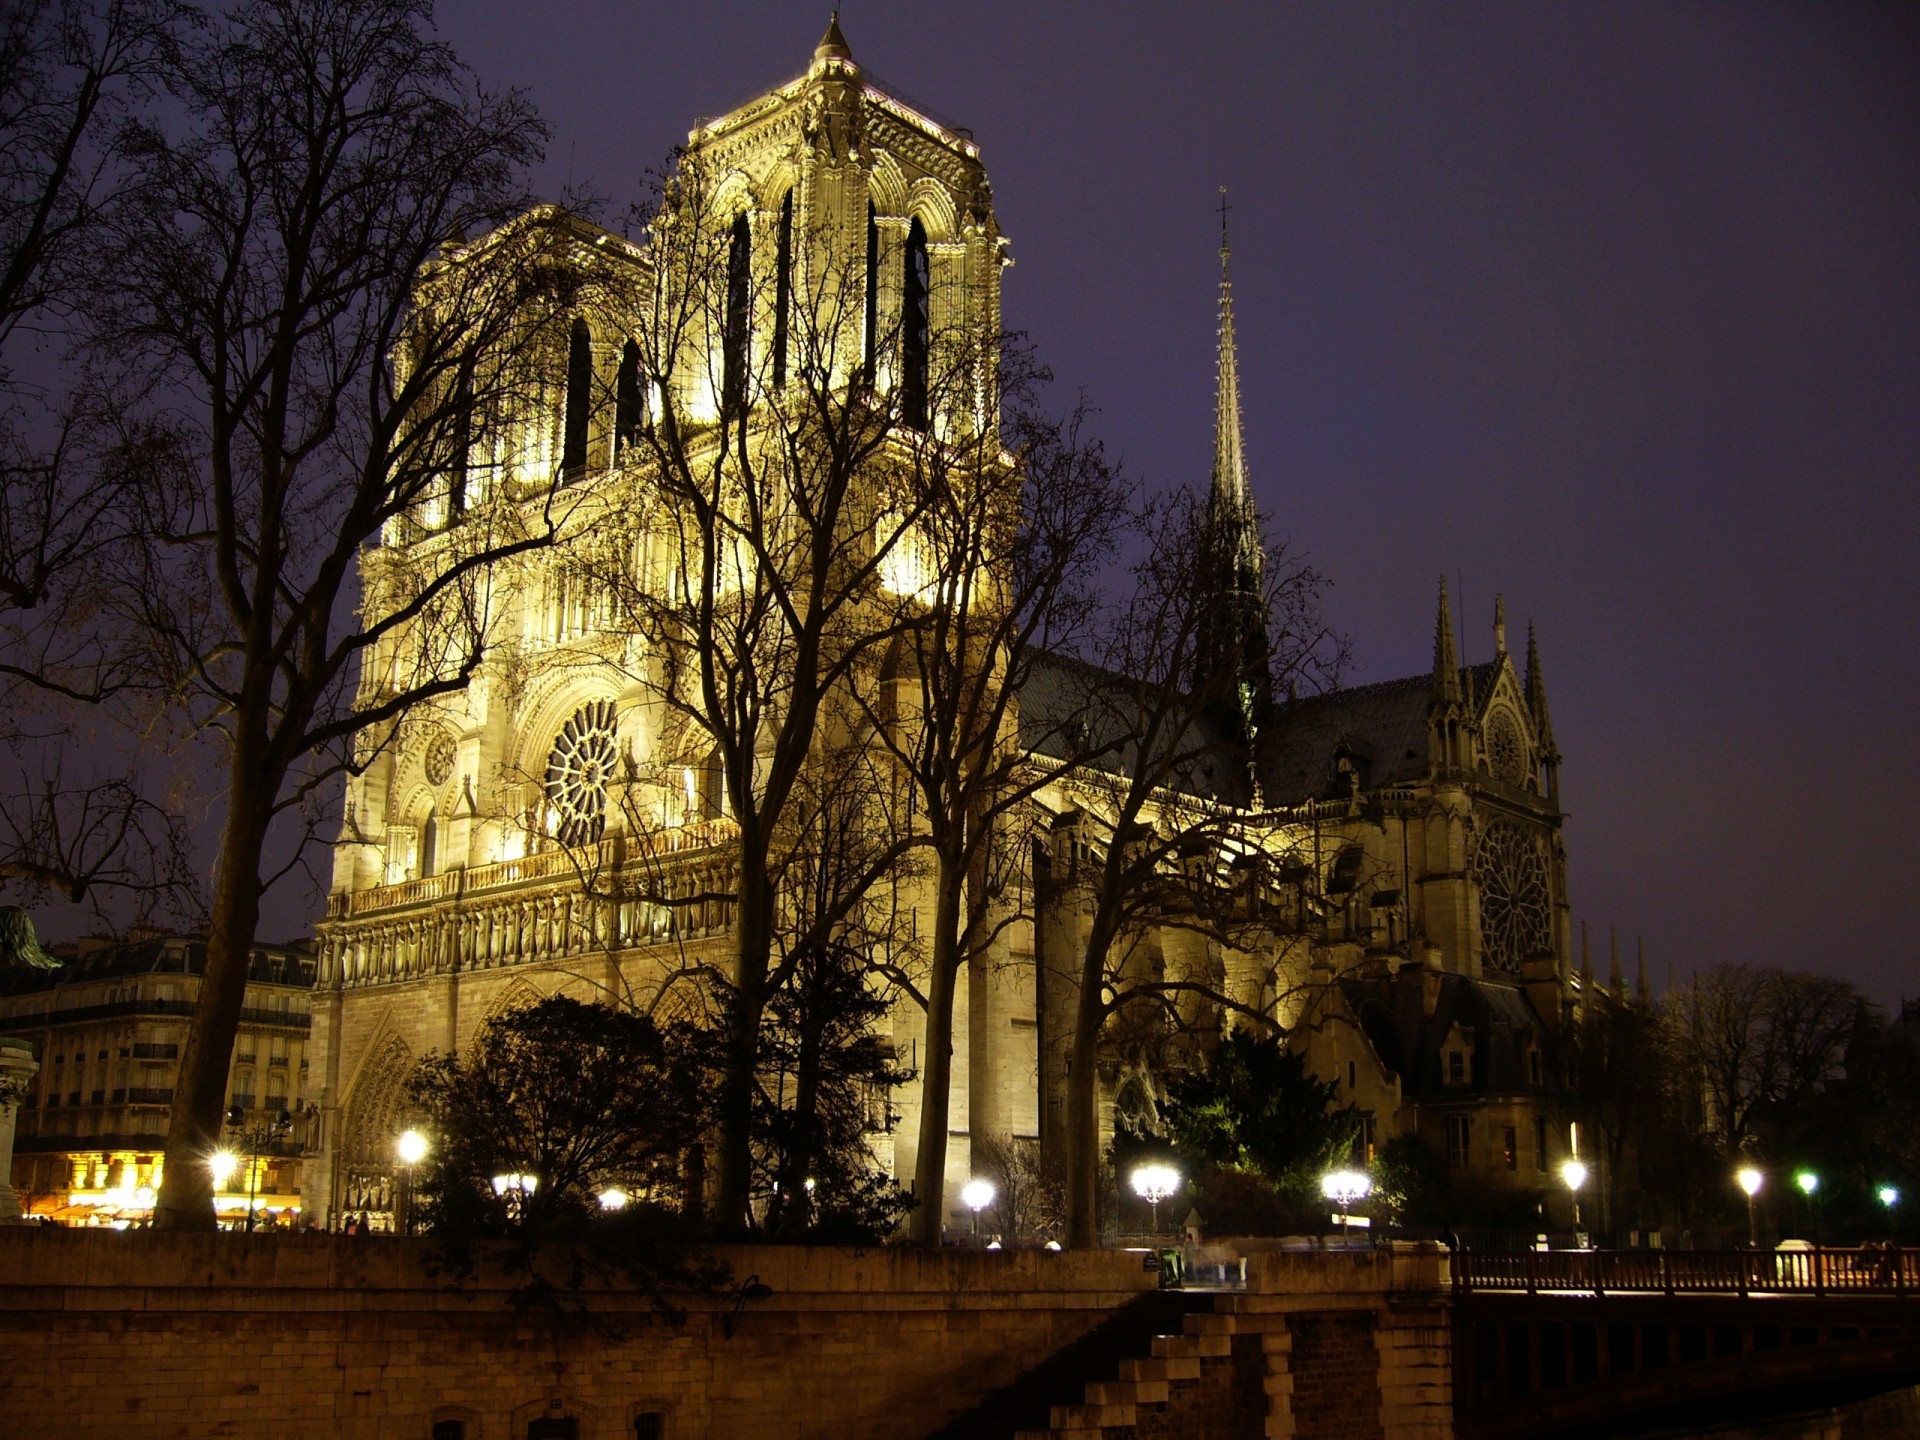 On Cathedrals, Christianity, and Compromise